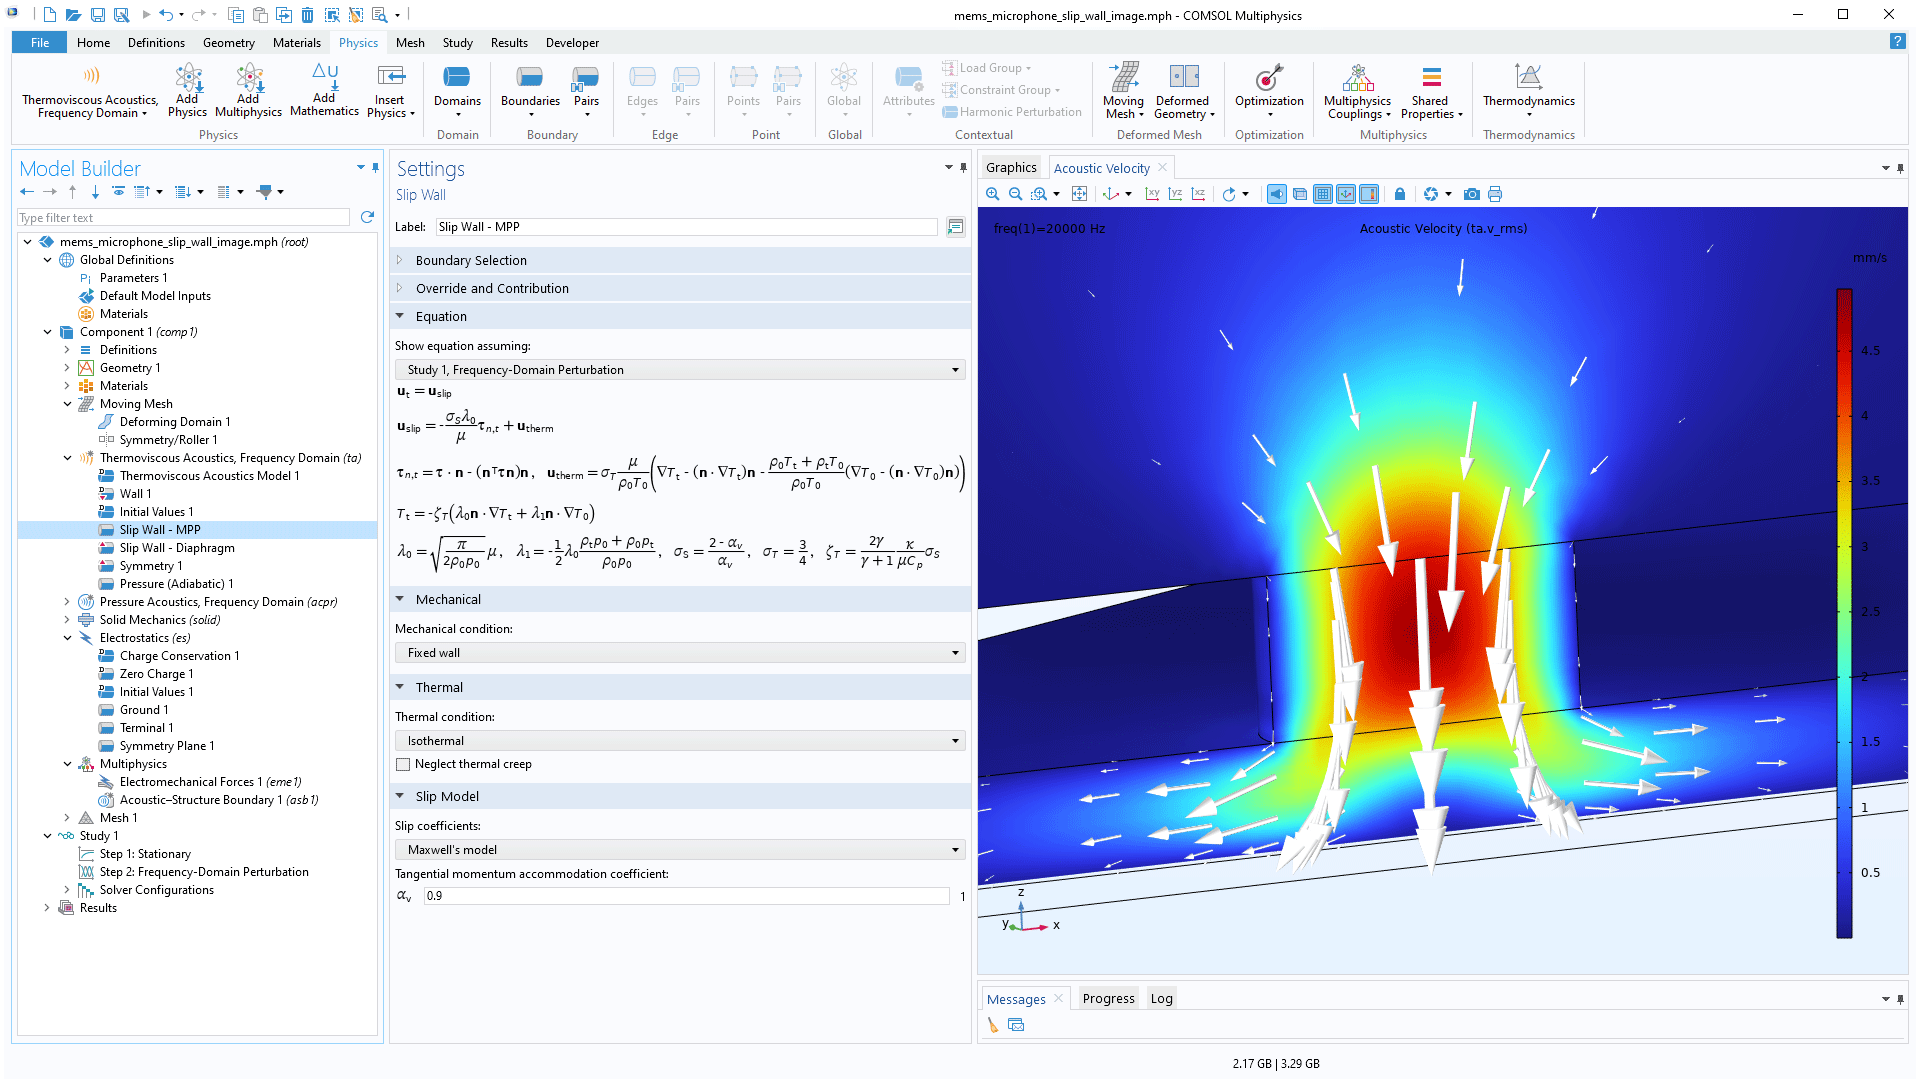 The COMSOL Multiphysics UI showing the Model Builder with the Slip Wall node highlighted, the corresponding Settings window, and a MEMS microphone model in the Graphics window.